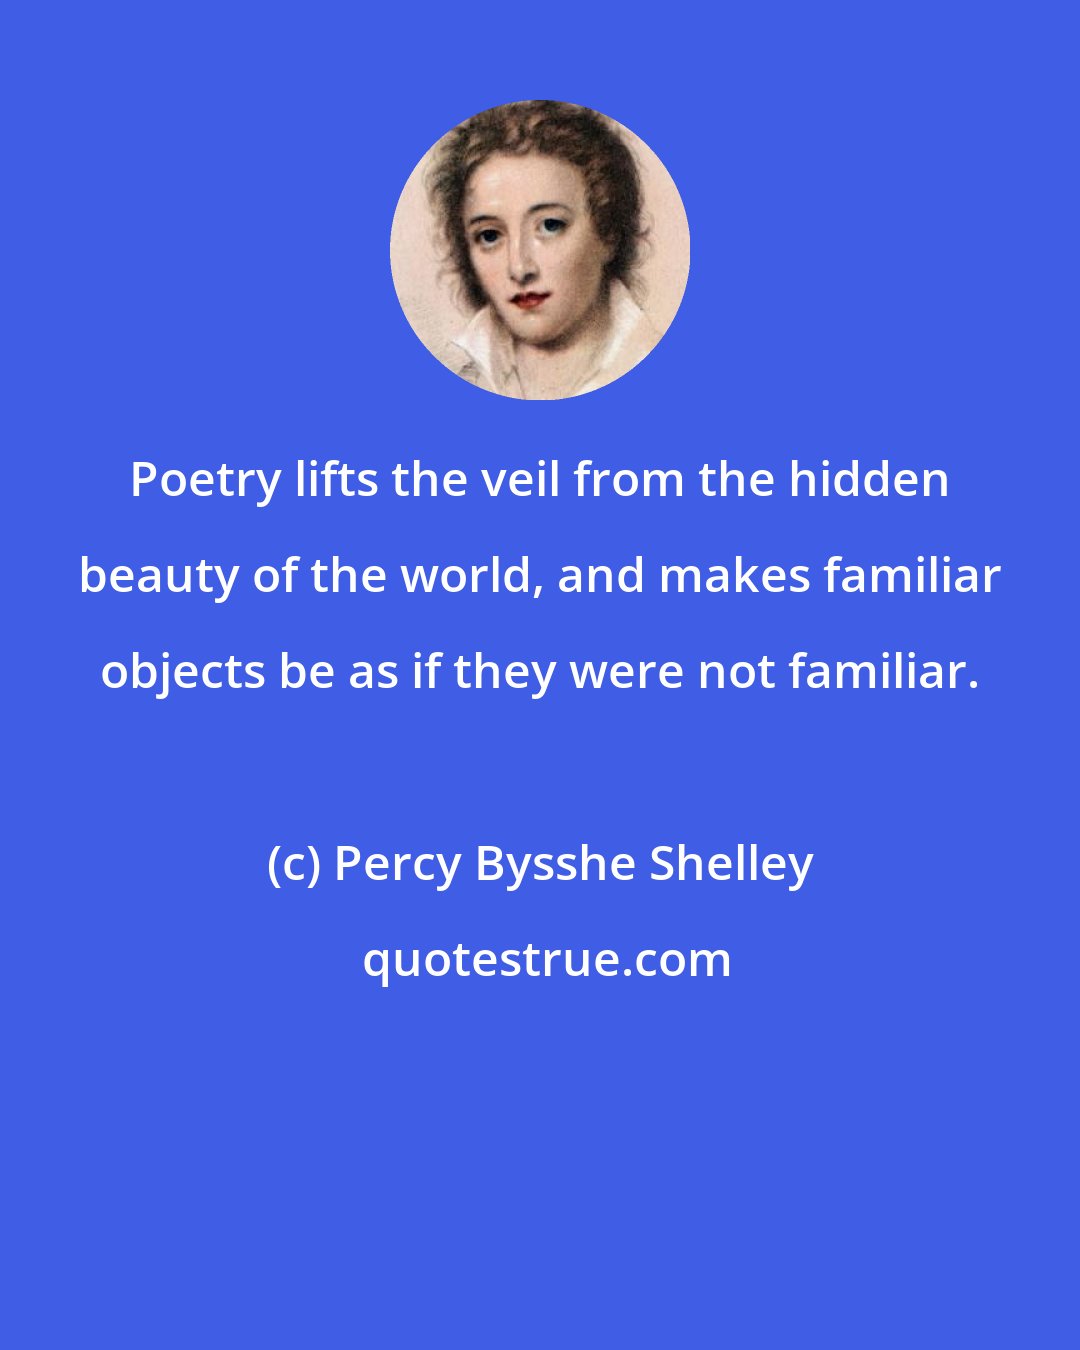 Percy Bysshe Shelley: Poetry lifts the veil from the hidden beauty of the world, and makes familiar objects be as if they were not familiar.